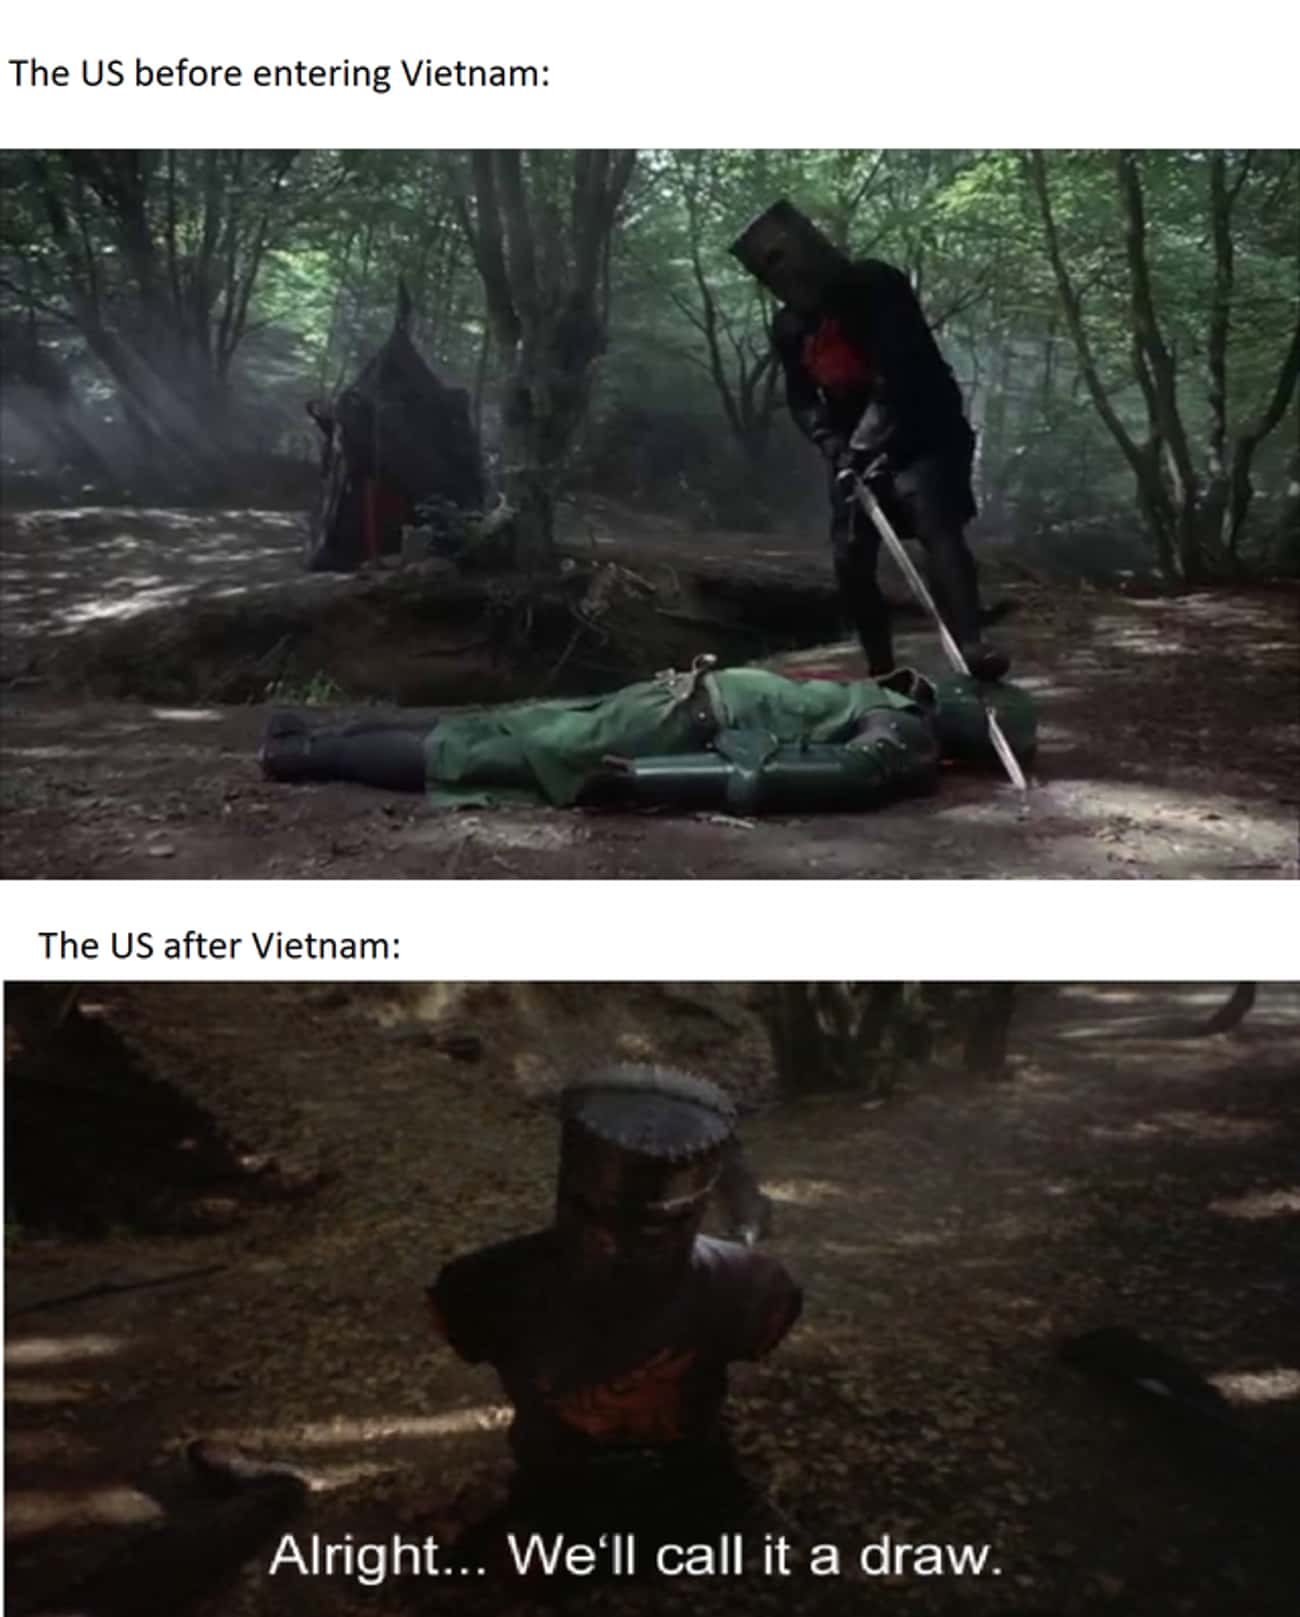 The black knight from monty python and the holy grail saying 